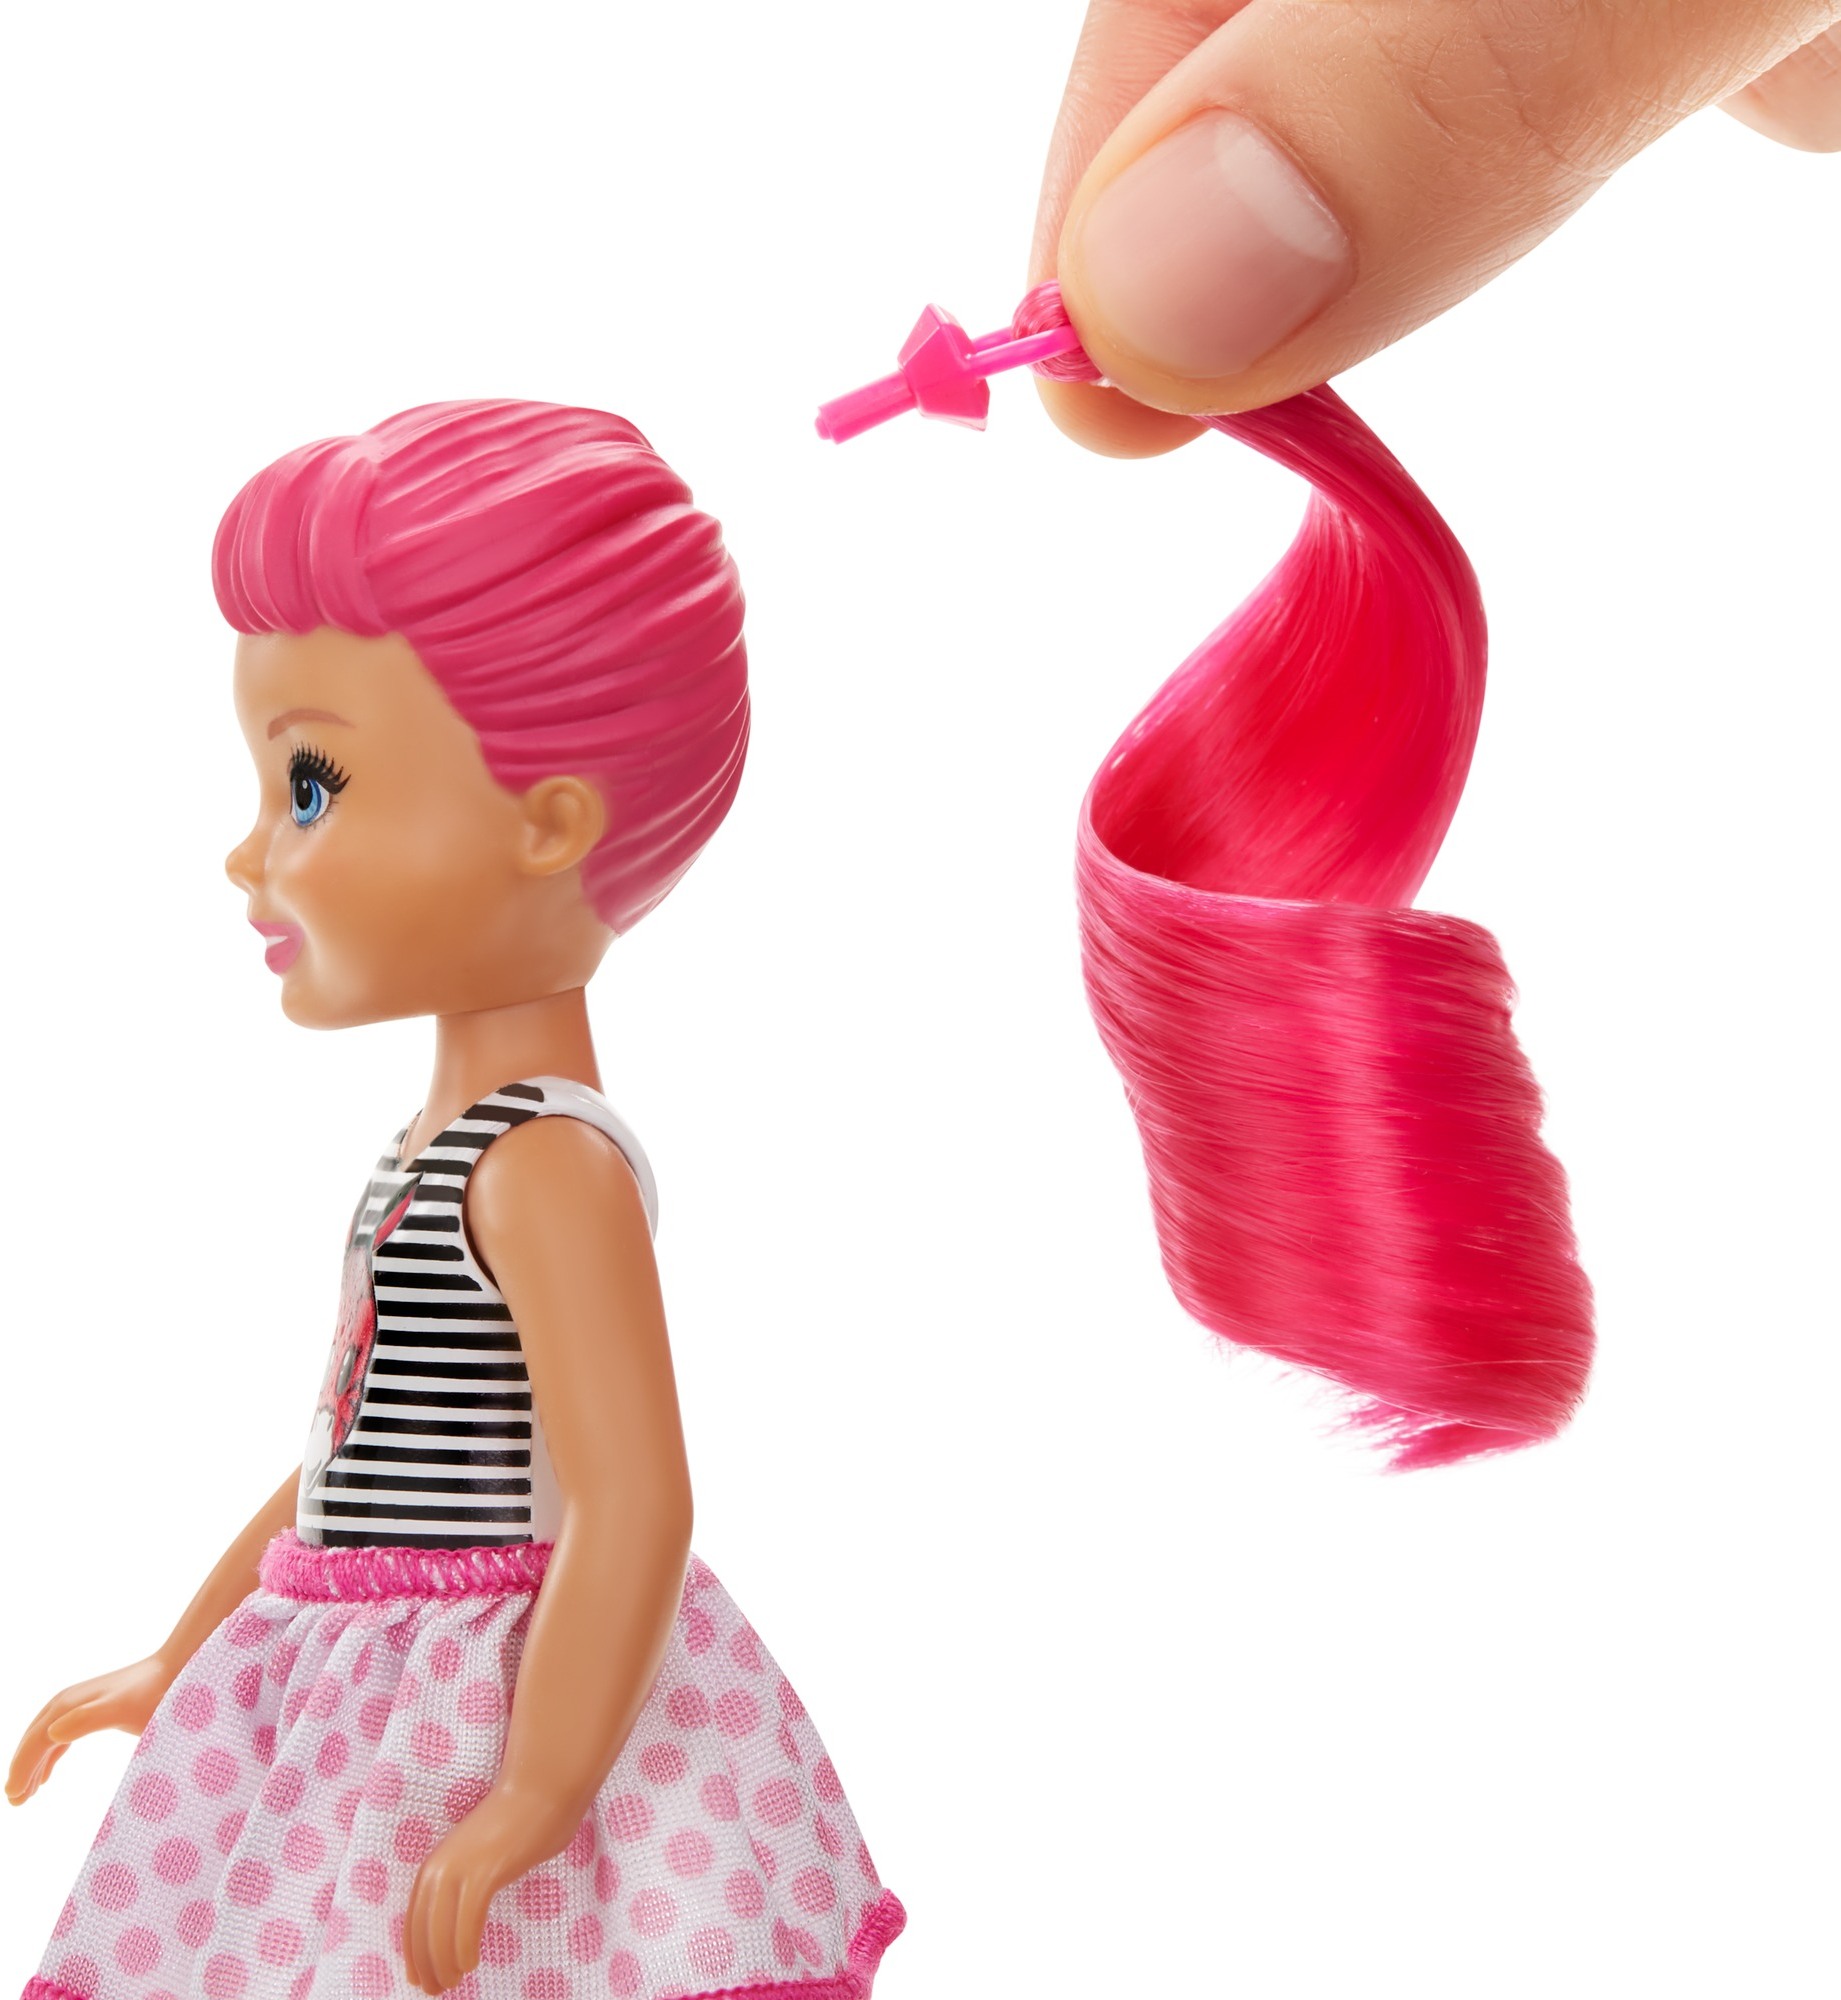 Barbie Color Reveal Chelsea Doll With 6 Surprises For Kids 3 Years Old & Up - image 4 of 12